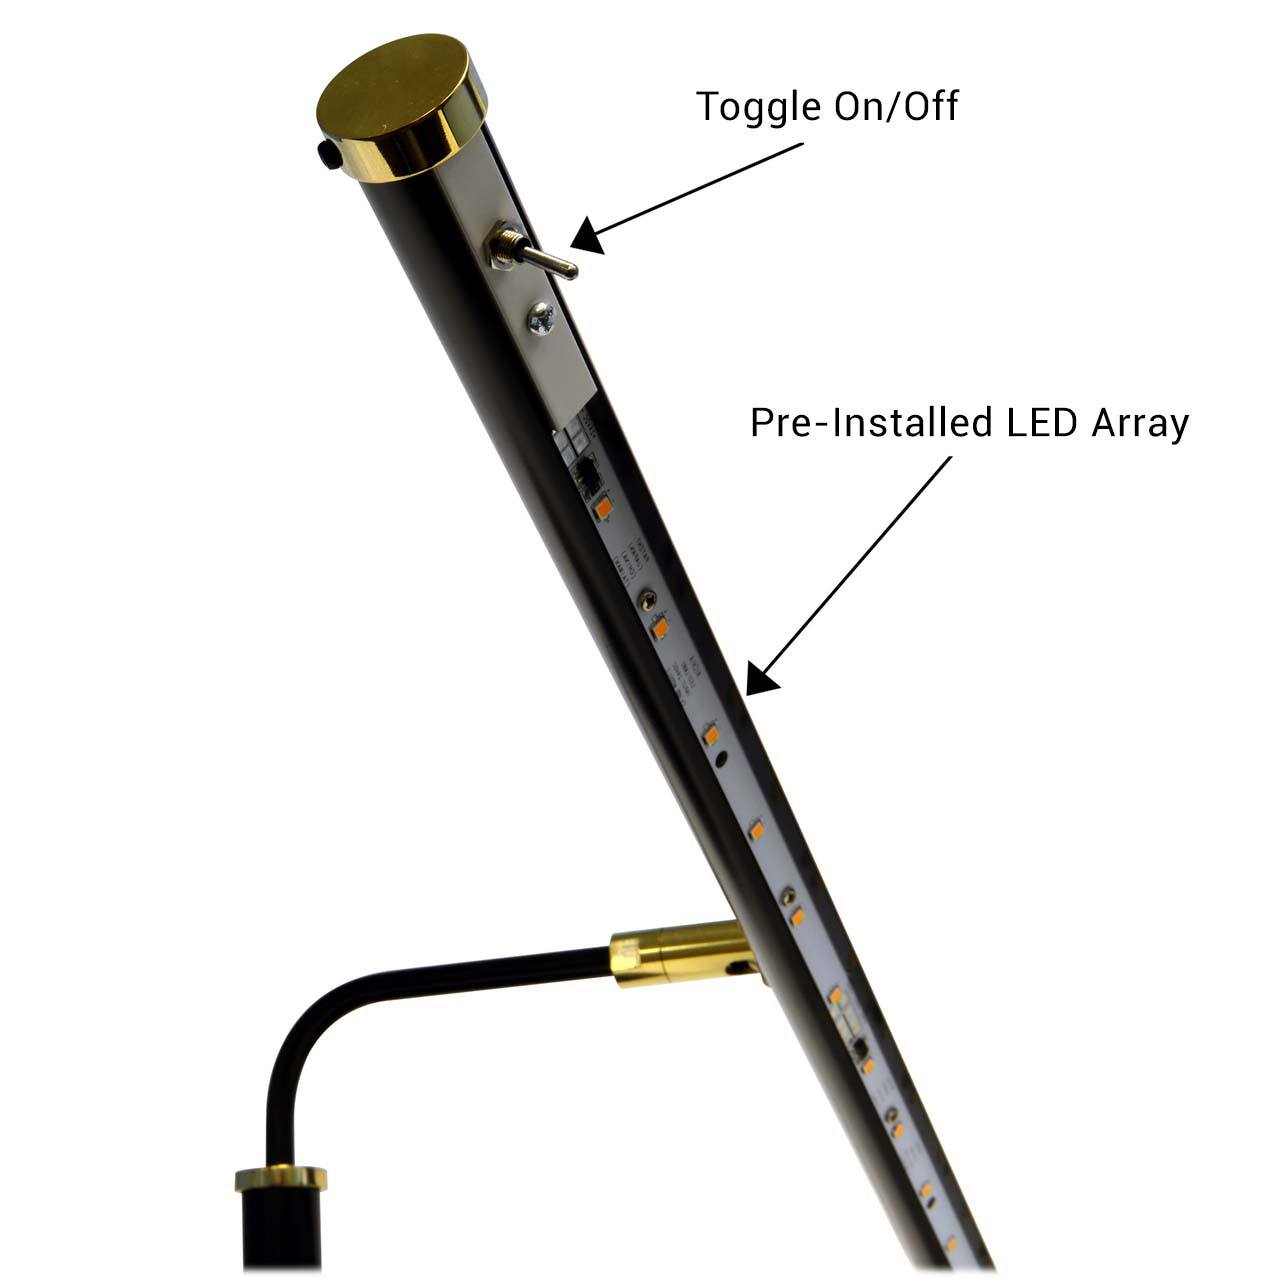 pre installed LED array in piano desk lamp